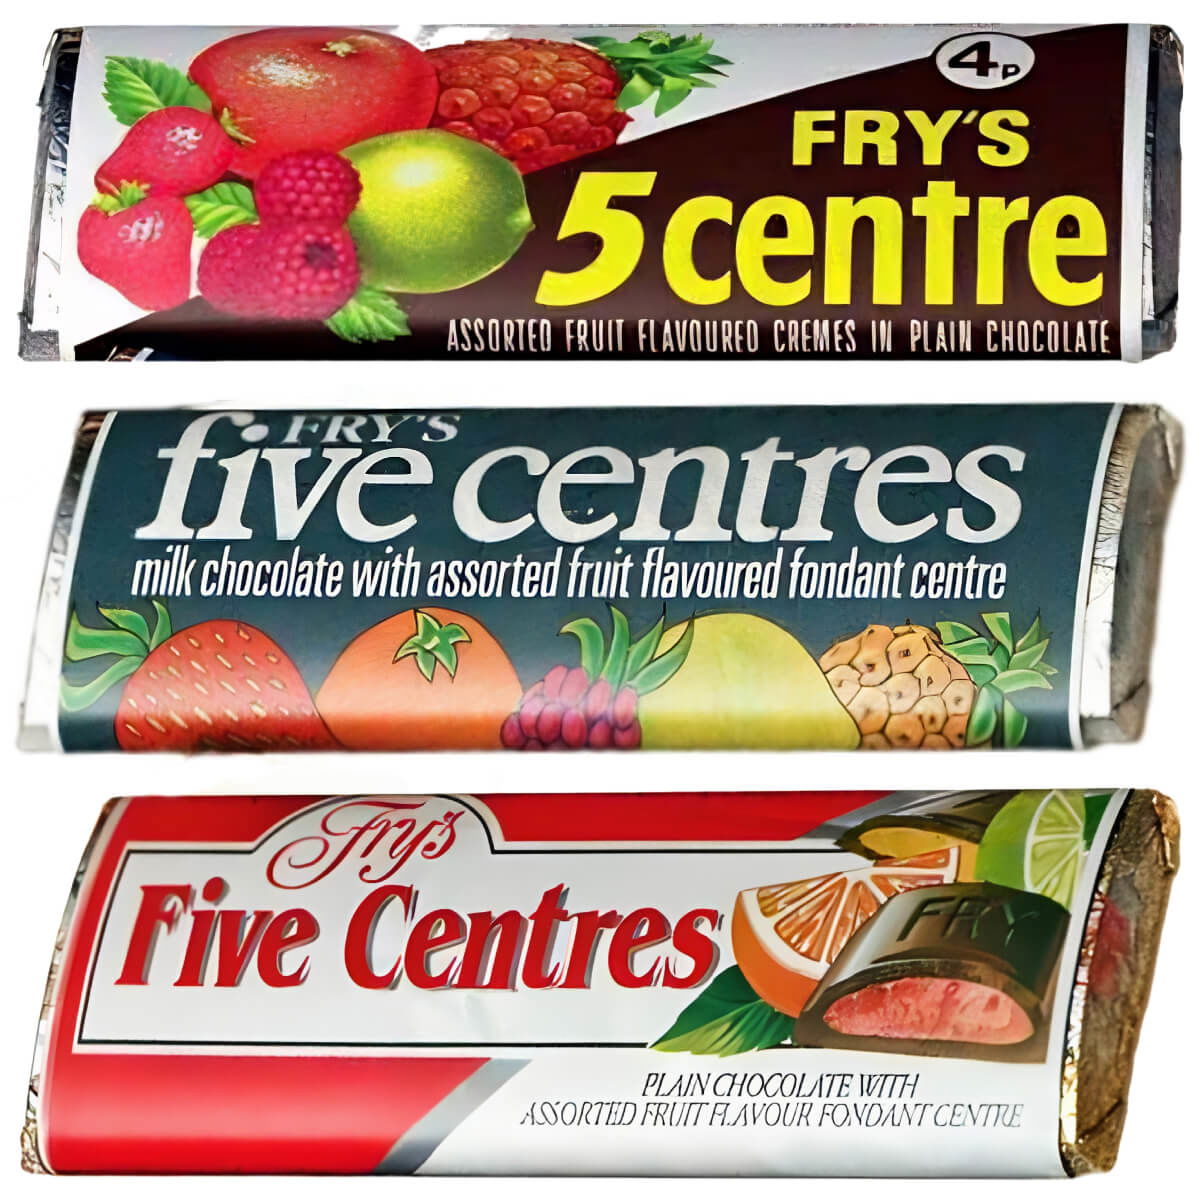 3 bars of Fry's Five Centres with different wrappers, from the 1970s and 80s.